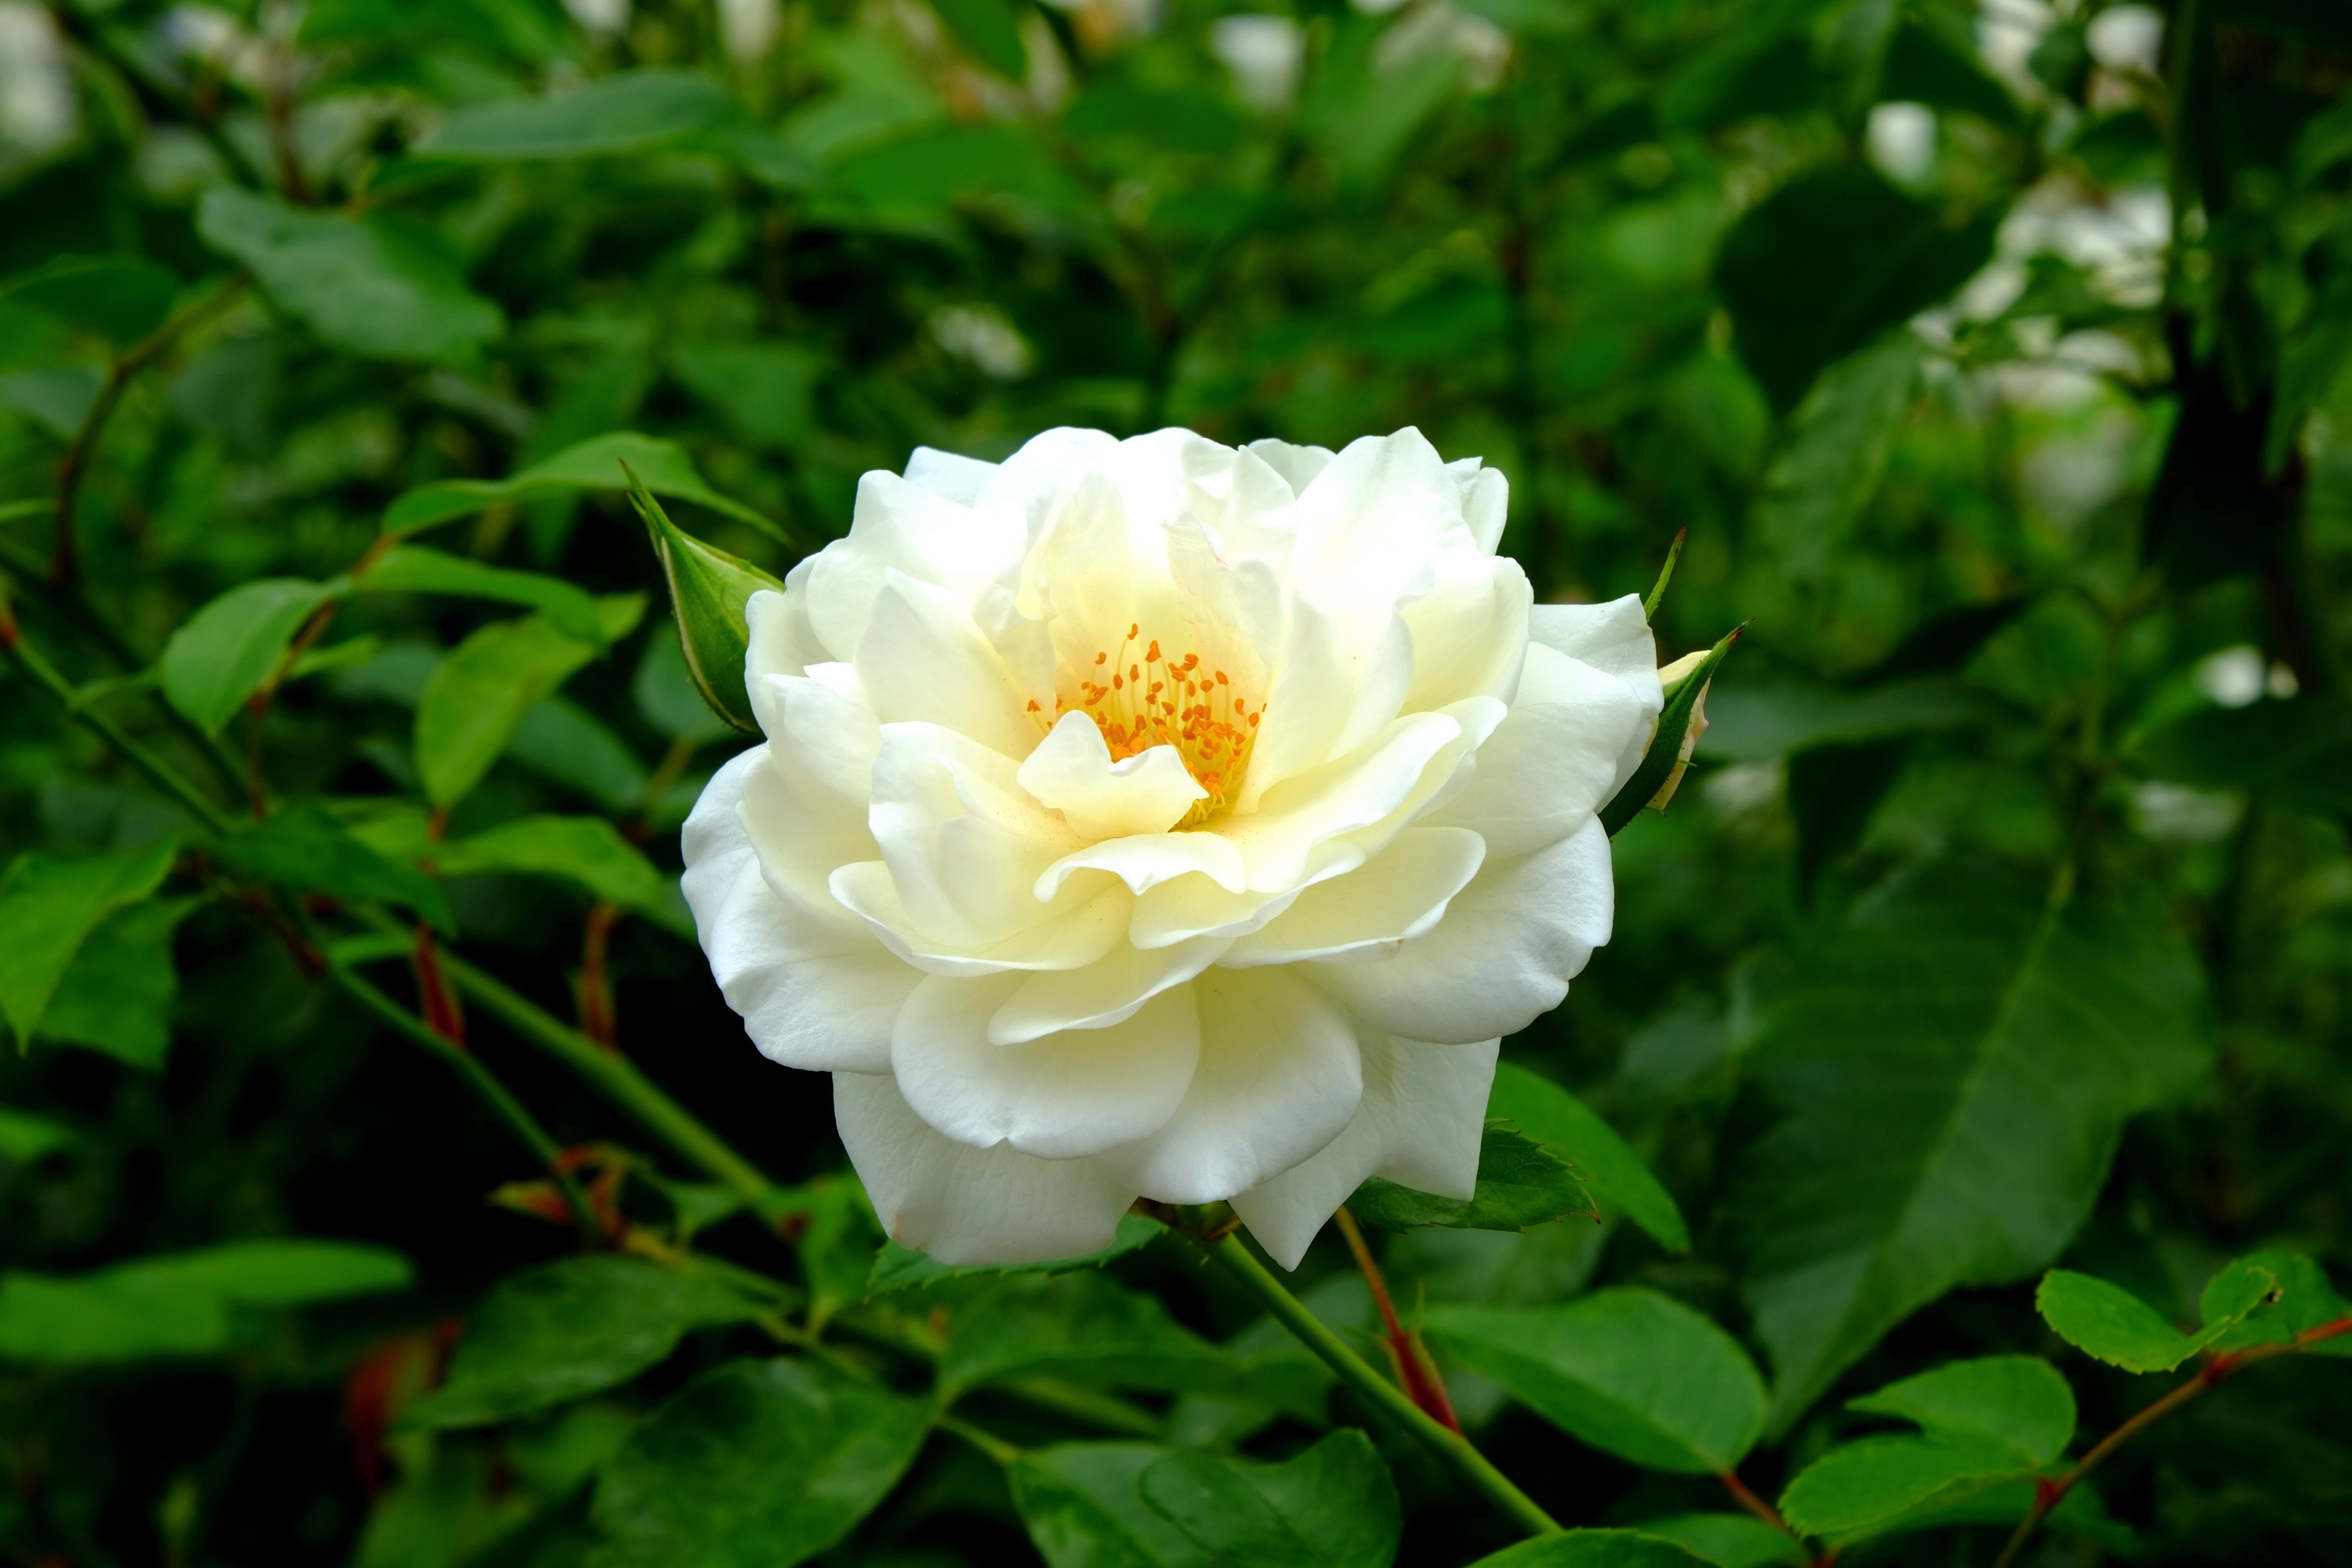 white petaled flower in close-up photography